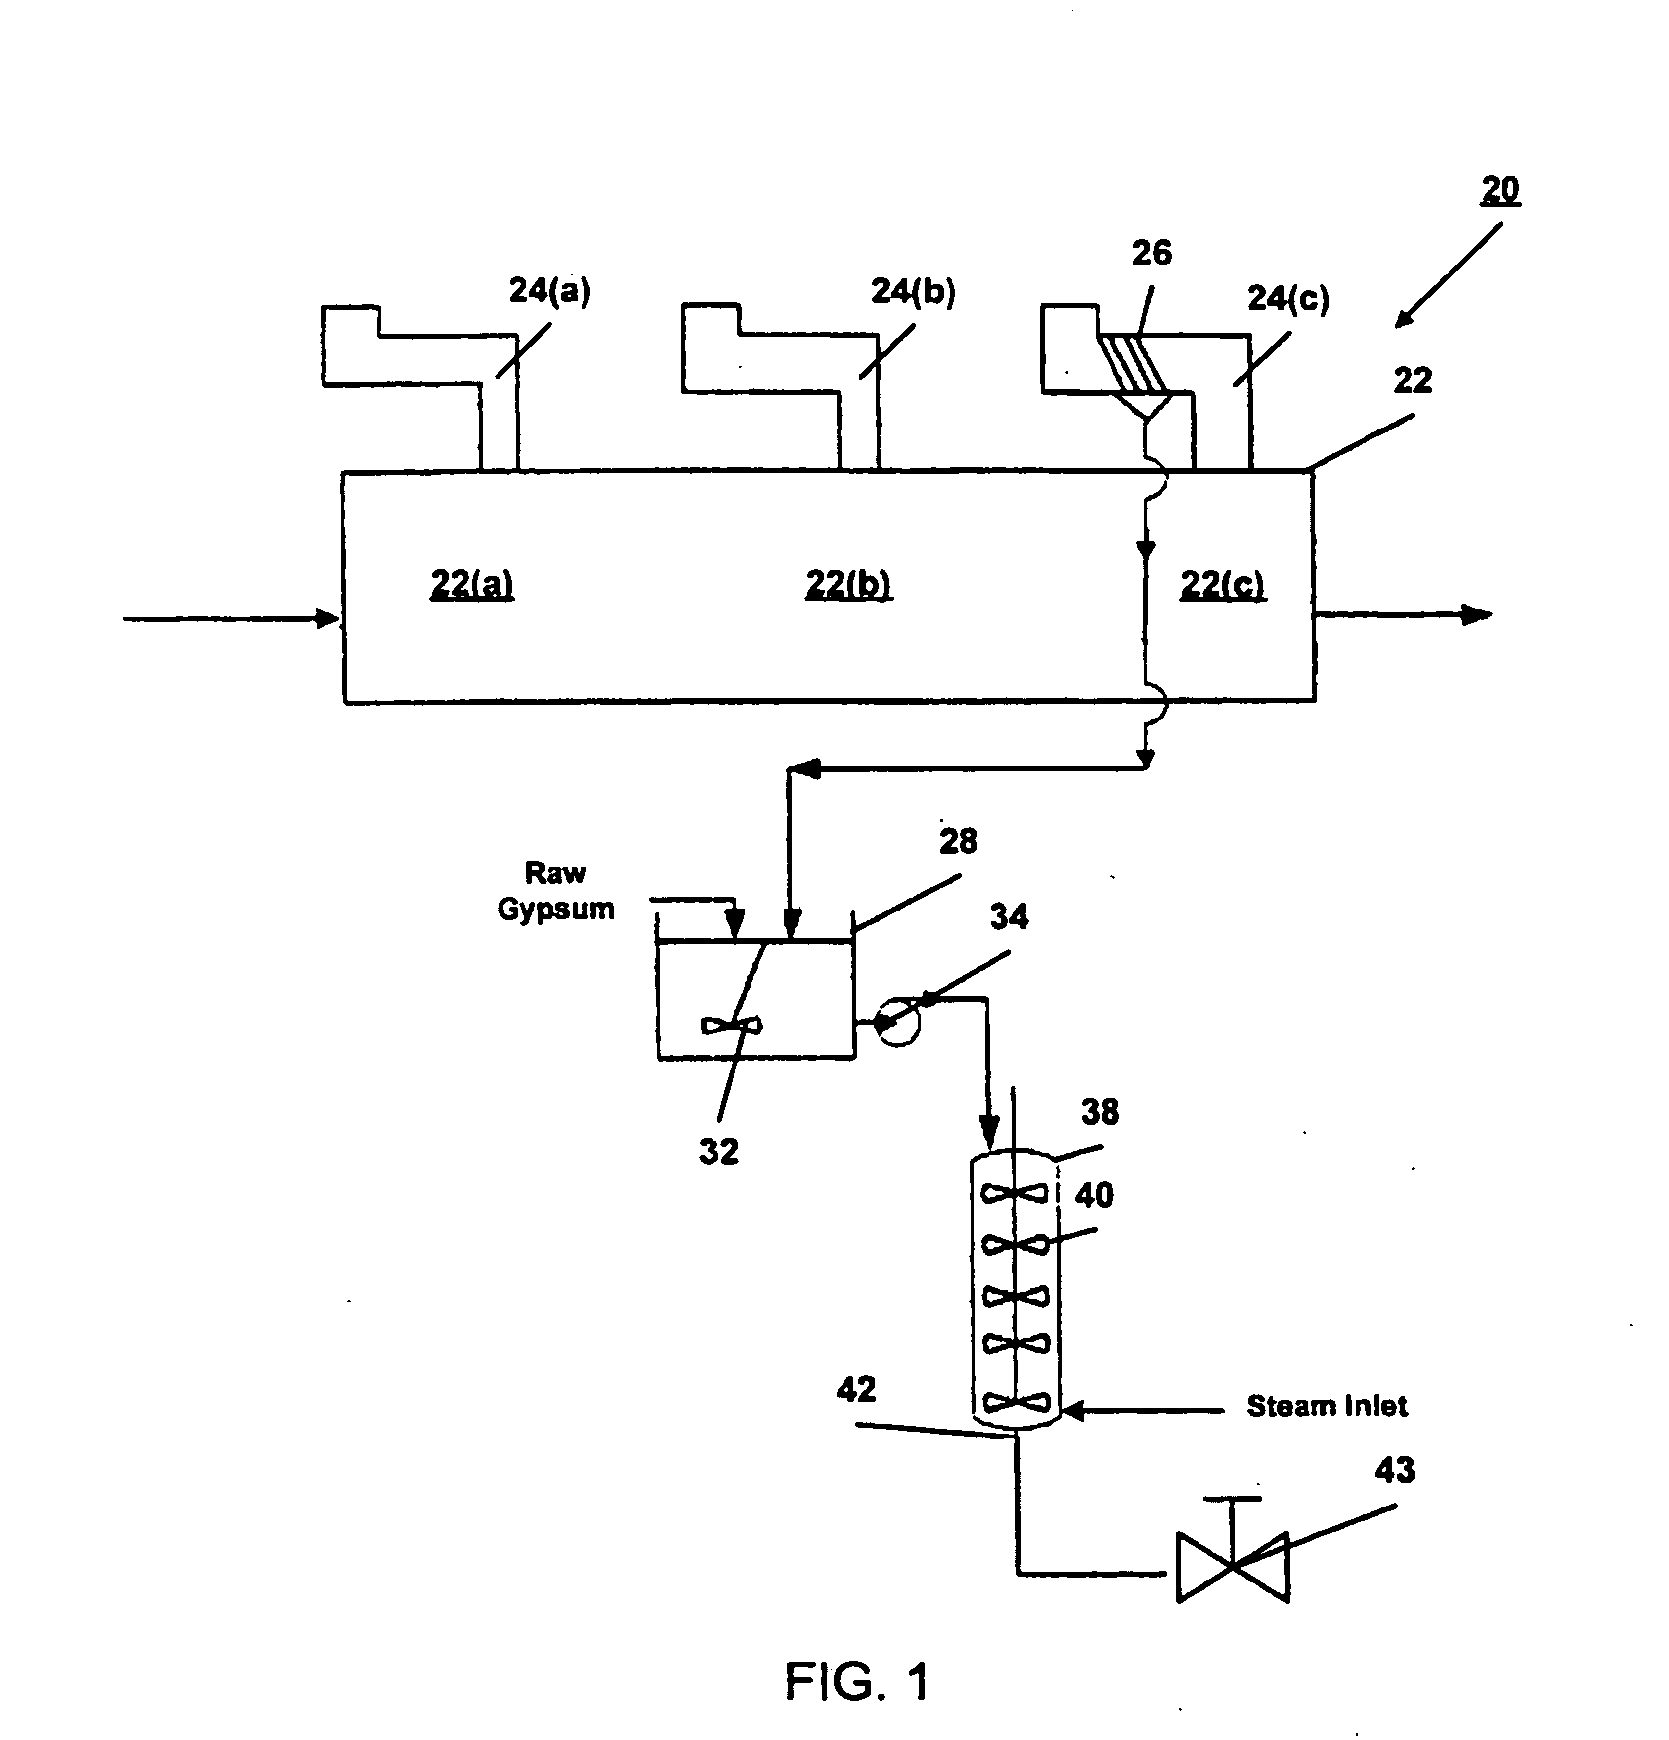 System and method for the production of alpha type gypsum using heat recovery